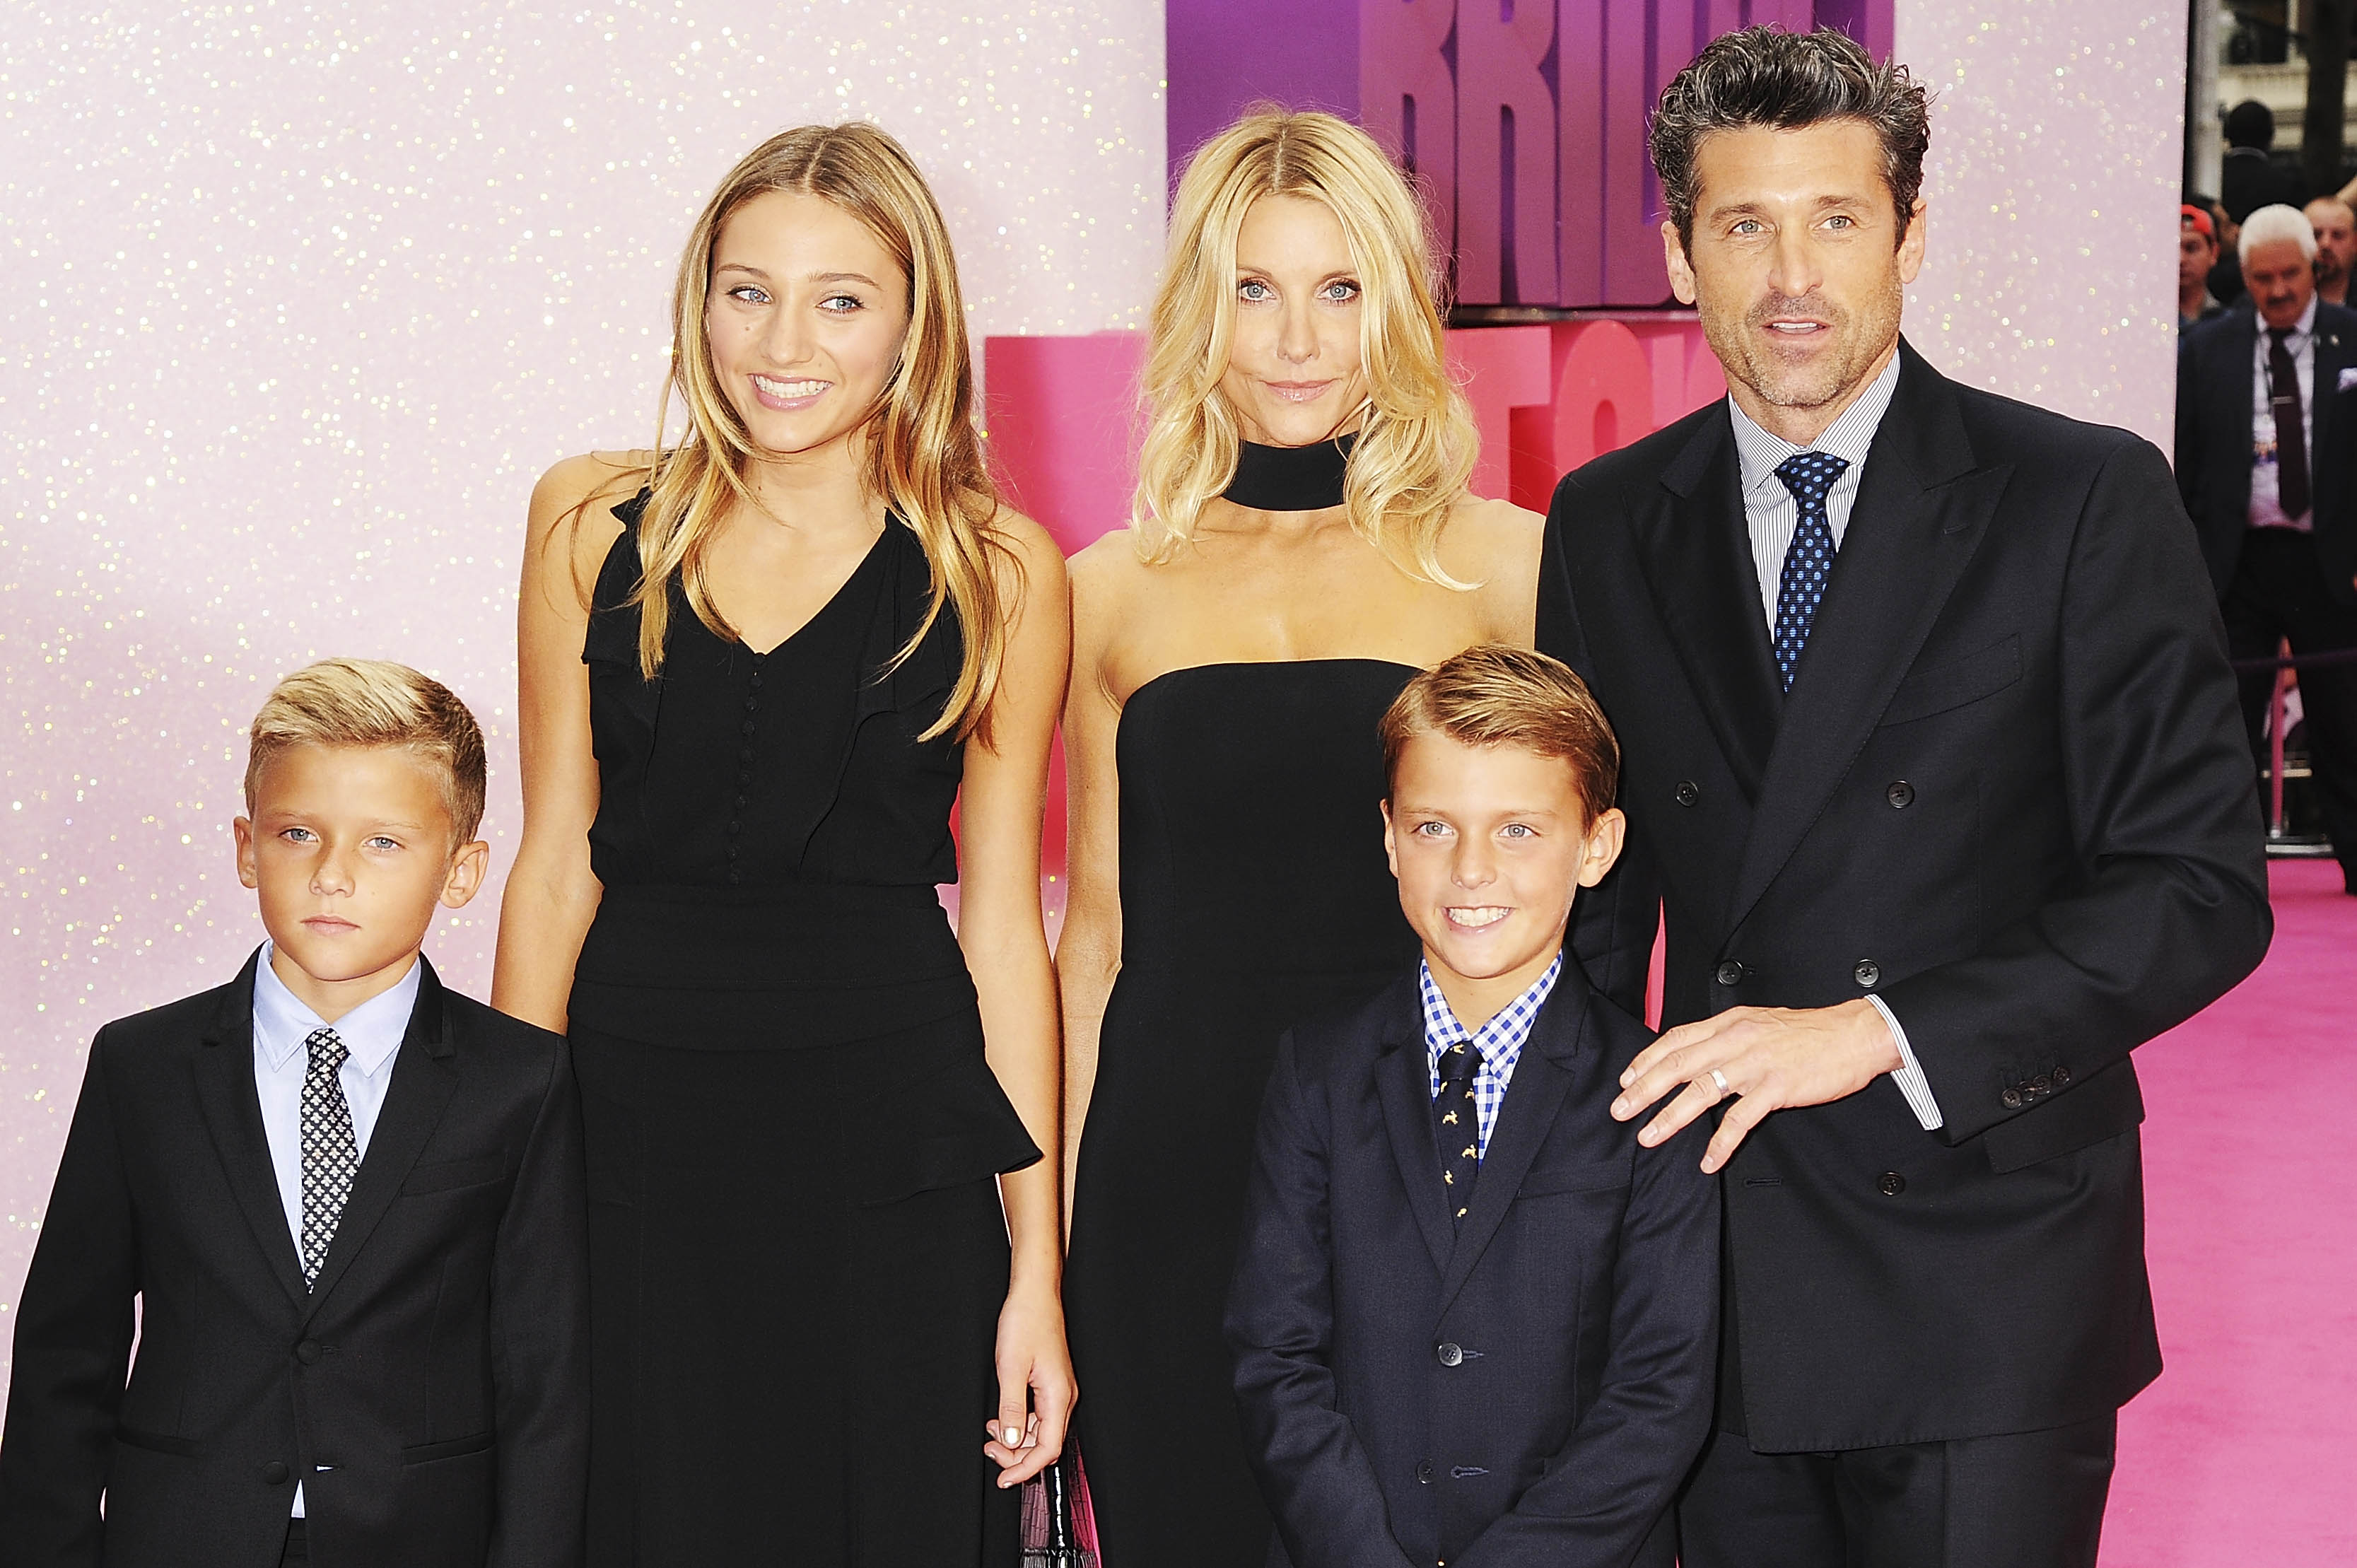 Patrick Dempsey with wife Jillian and children during the world premiere of "Bridget Jones's Baby" in London, England on September 5, 2016 | Source: Getty Images